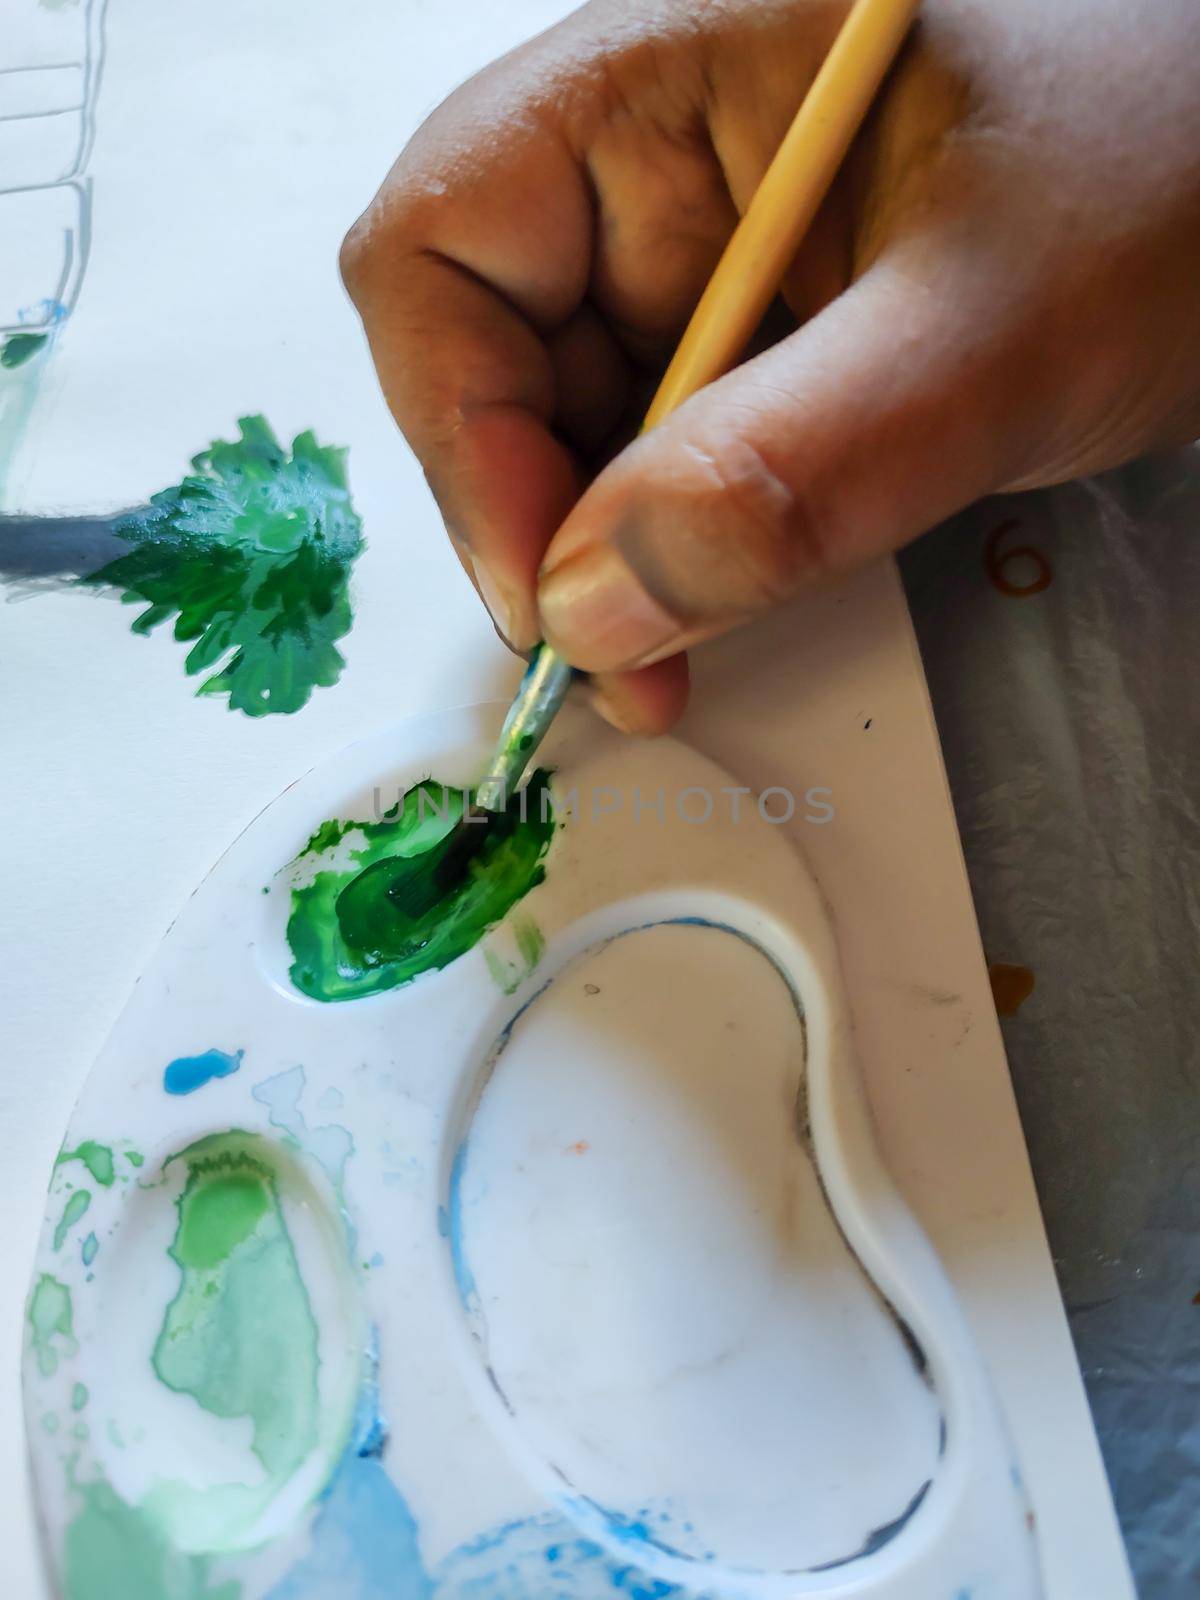 A child is painting in a paper. In the picture the child is painting grasses in a white background.